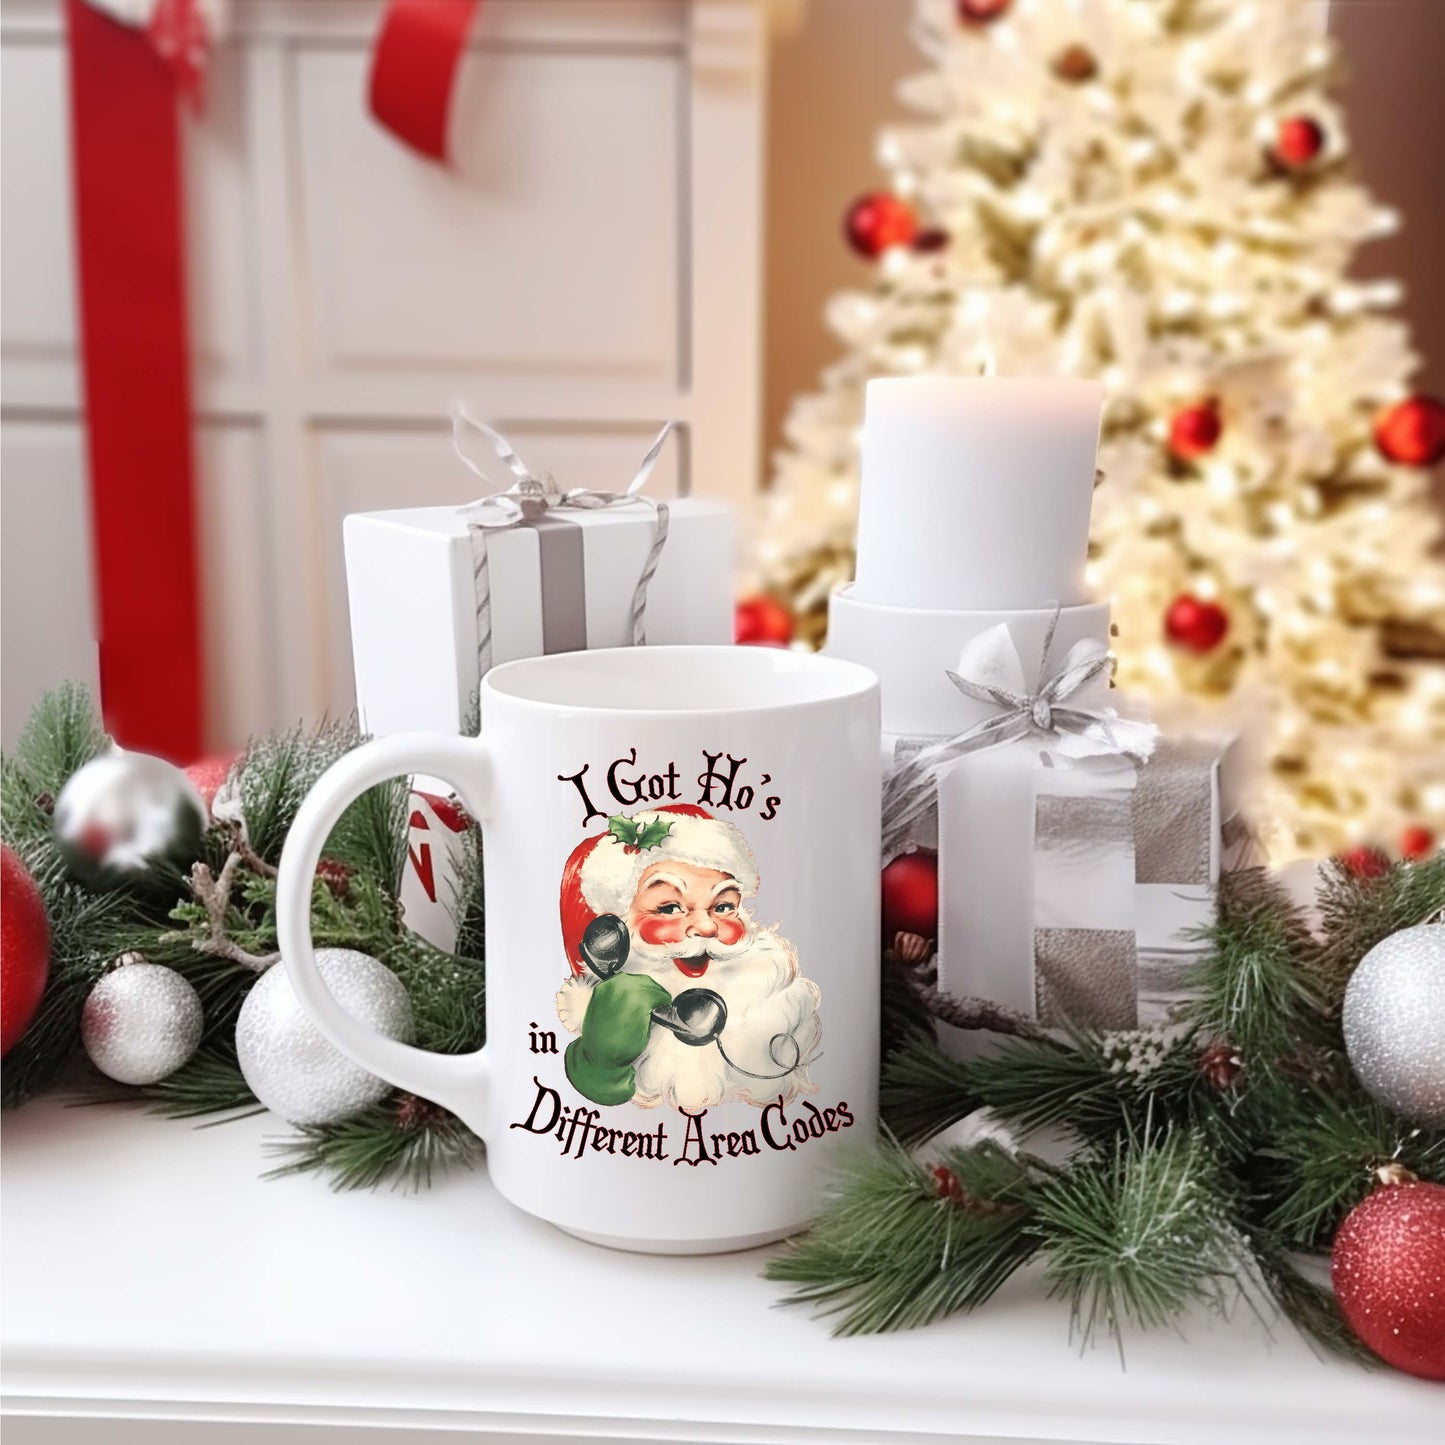 I Have Ho's in Different Area Codes Santa Holiday Coffee Mug